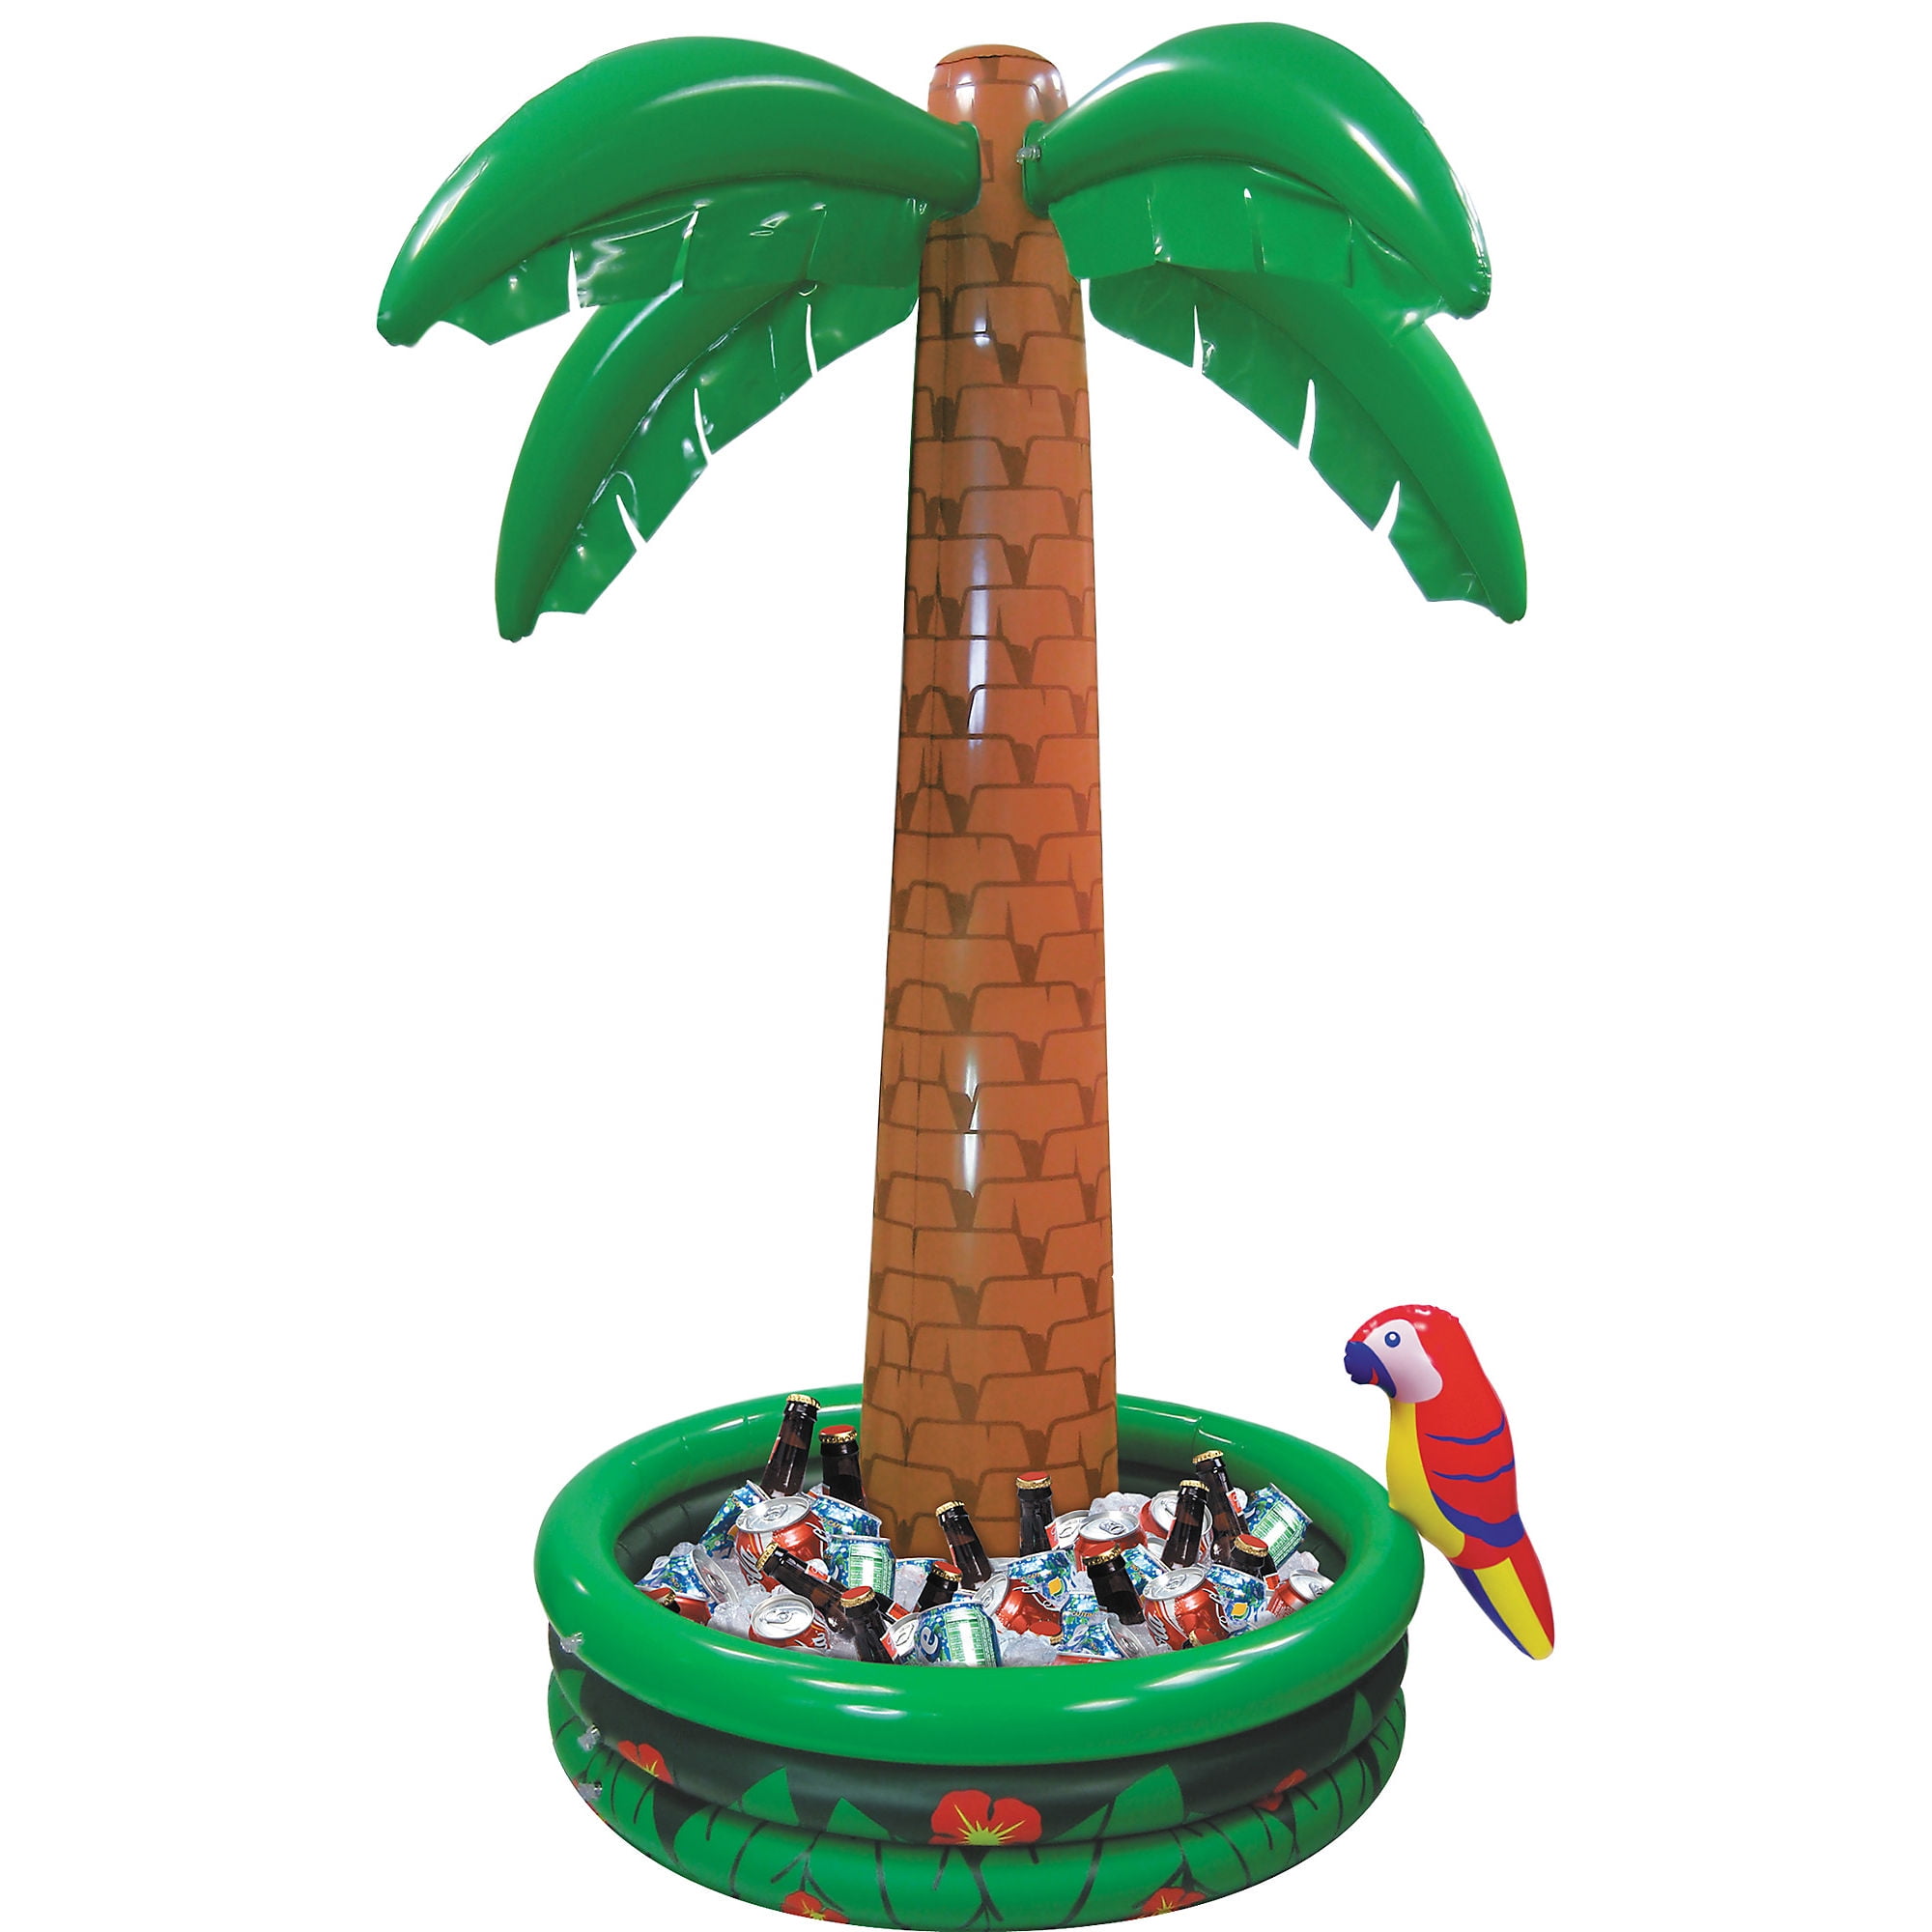 Jumbo Inflatable Palm Tree Cooler, Inflates then Packs up for Storage